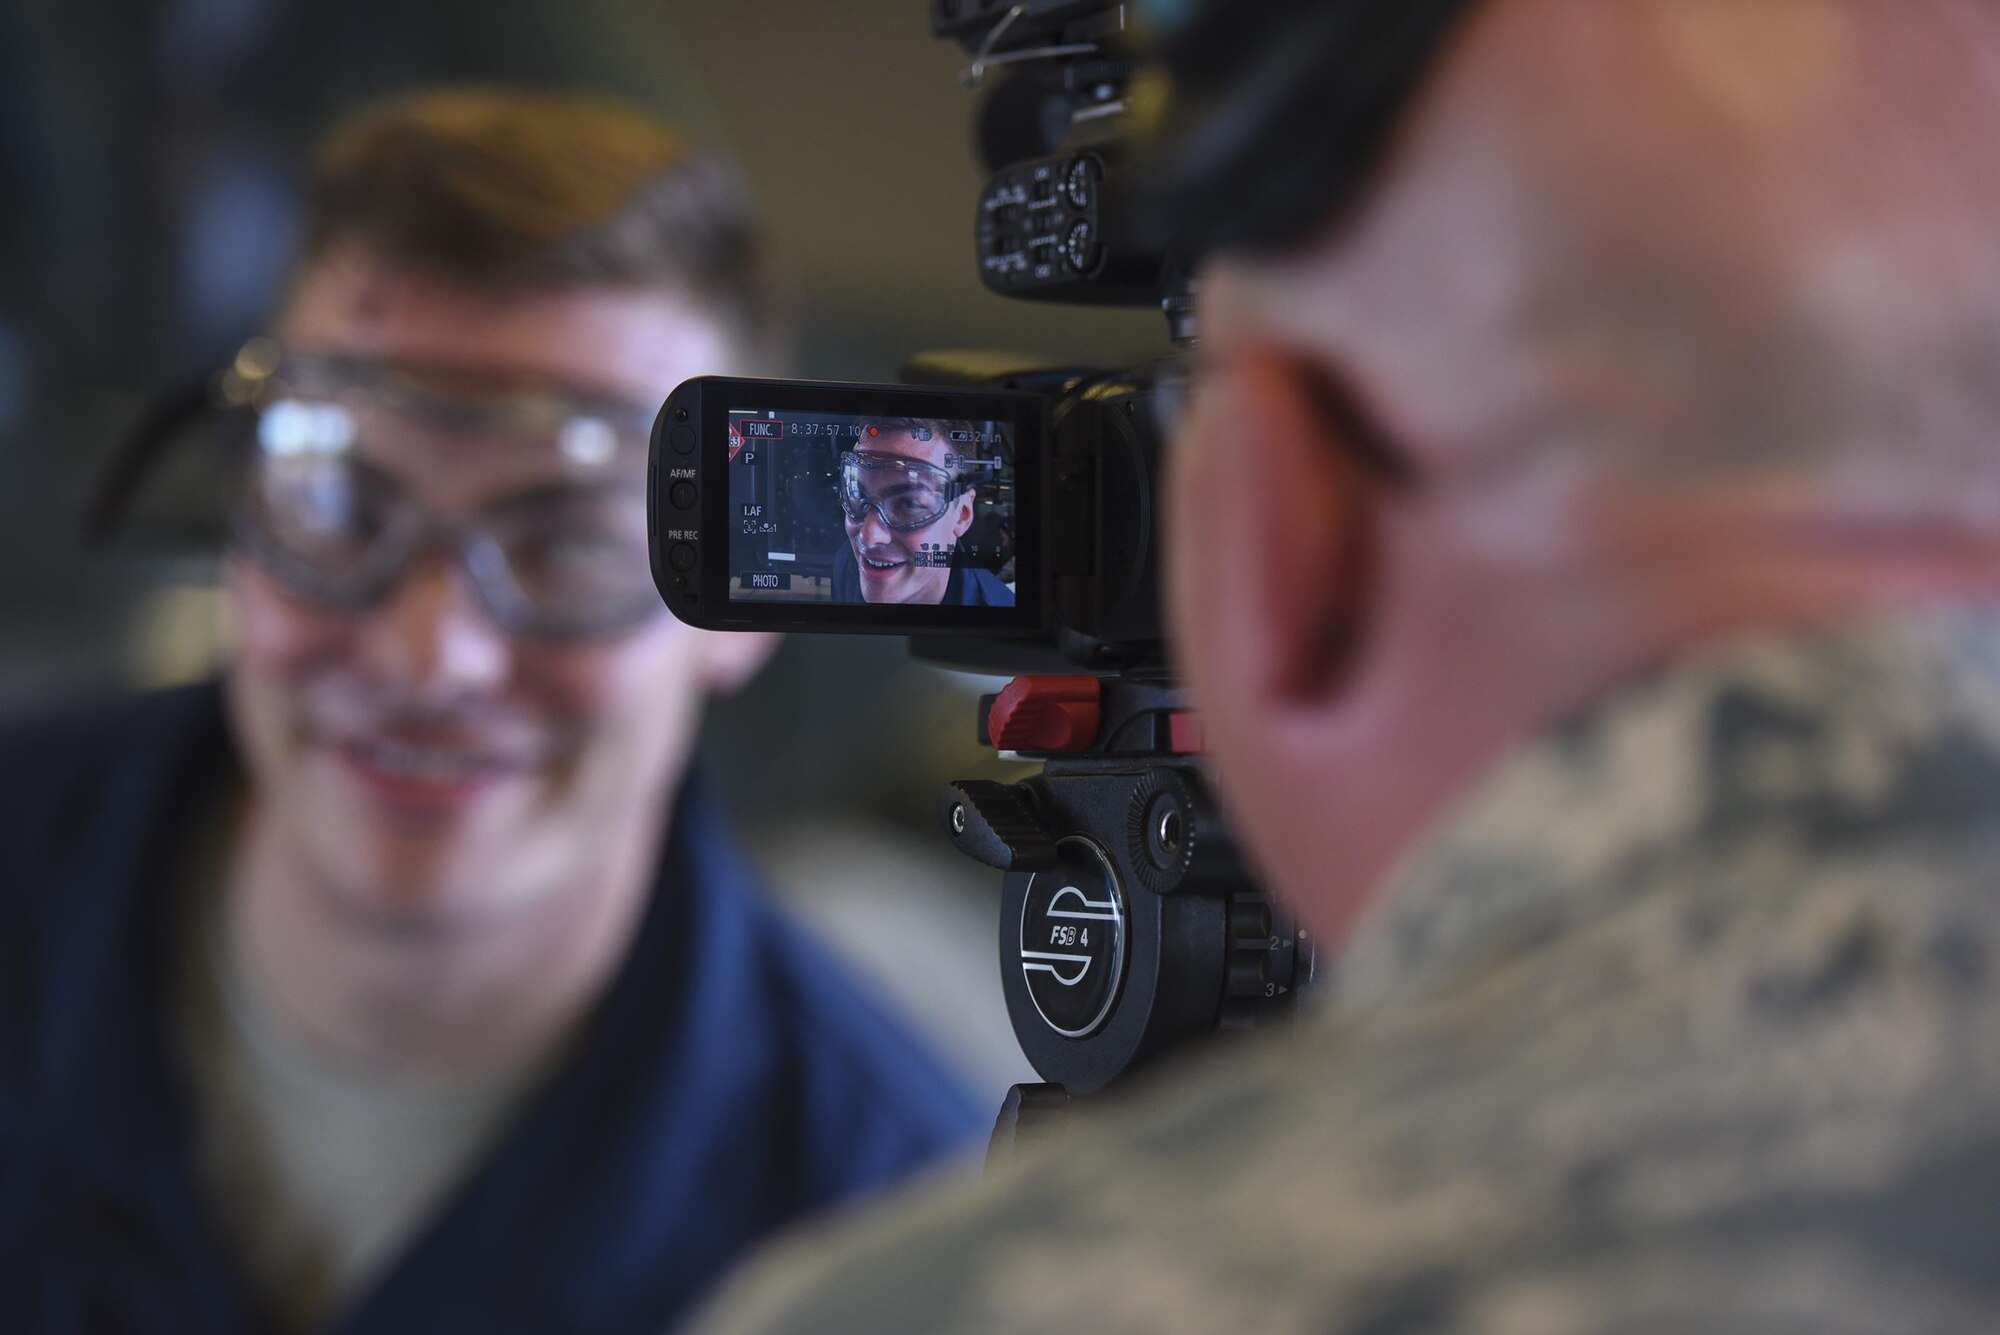 Tech. Sgt. Timothy Gallagher, 23d Wing Public Affairs broadcaster, records fellow broadcaster Senior Airman Kyle Saunders as he performs as an interim vehicle maintenance specialist,  during the ‘A Closer Look’ video series, July 13, 2017, at Moody Air Force Base, Ga. The series shows 23d WG PA broadcasters experiencing the grit and grime of several trades for Airmen to better understand and appreciate different missions. To watch the series, stay tuned for the premier on the Moody Facebook page and www.moody.af.mil, in August 15. (U.S. Air Force photo by Senior Airman Greg Nash)